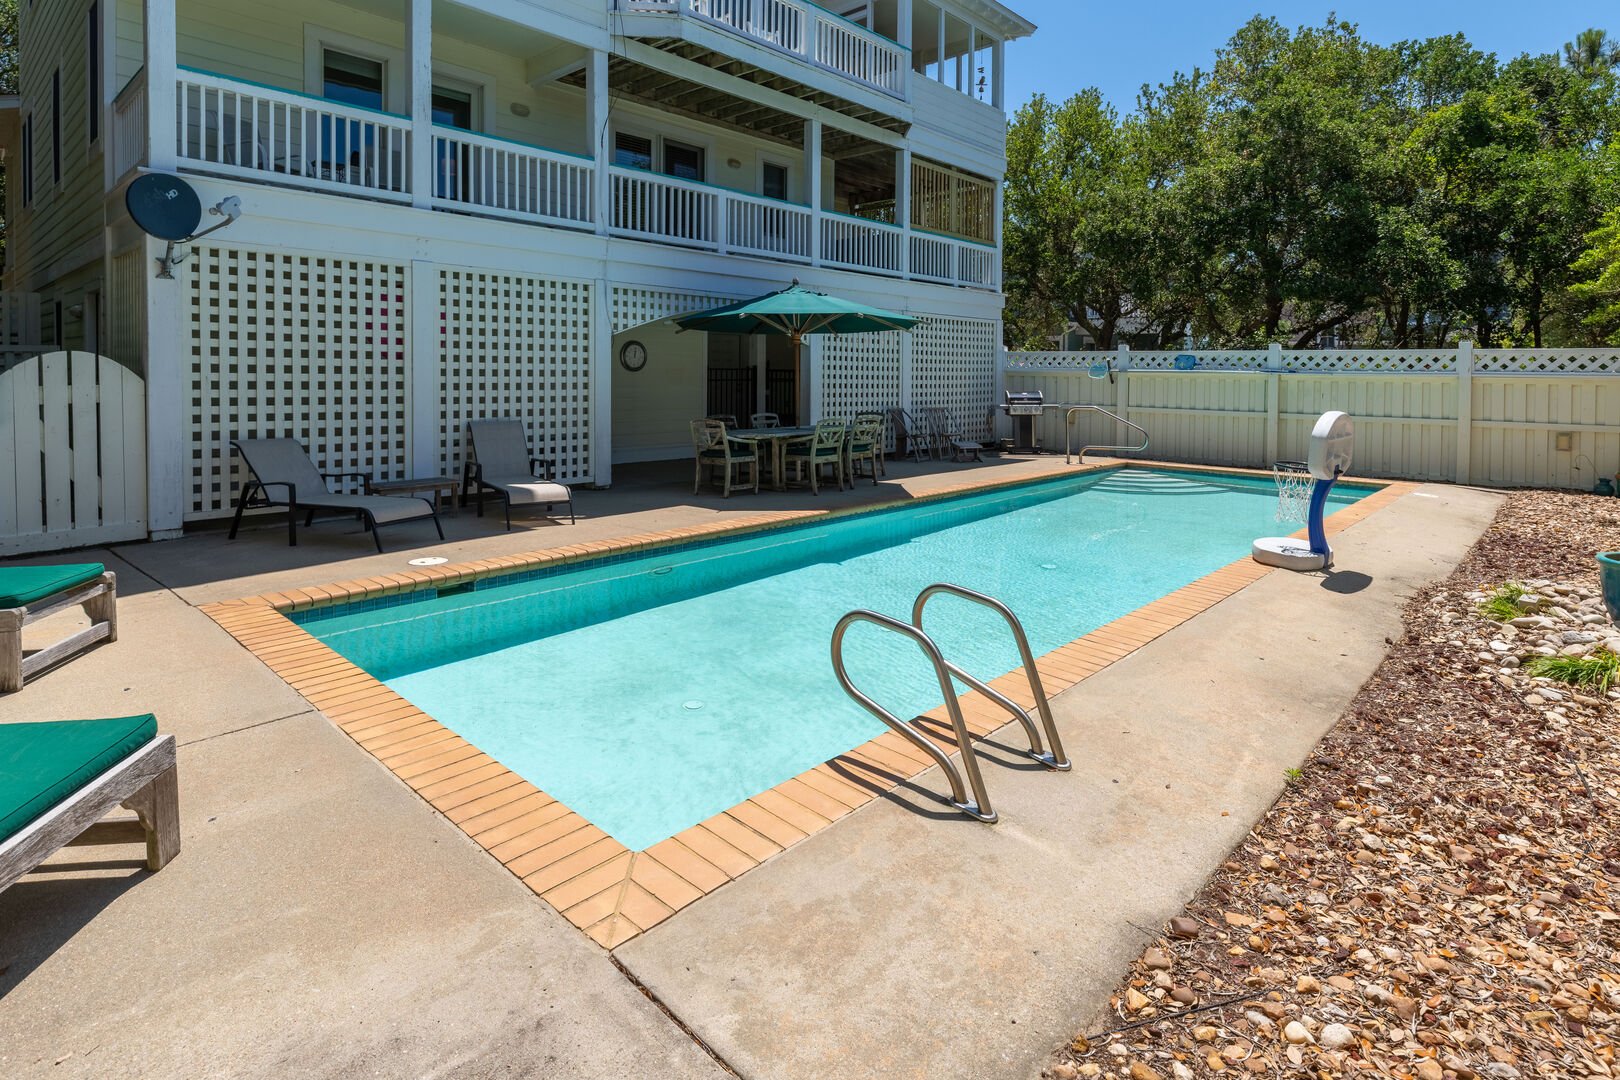 Private Pool: open mid-May to mid. Oct.